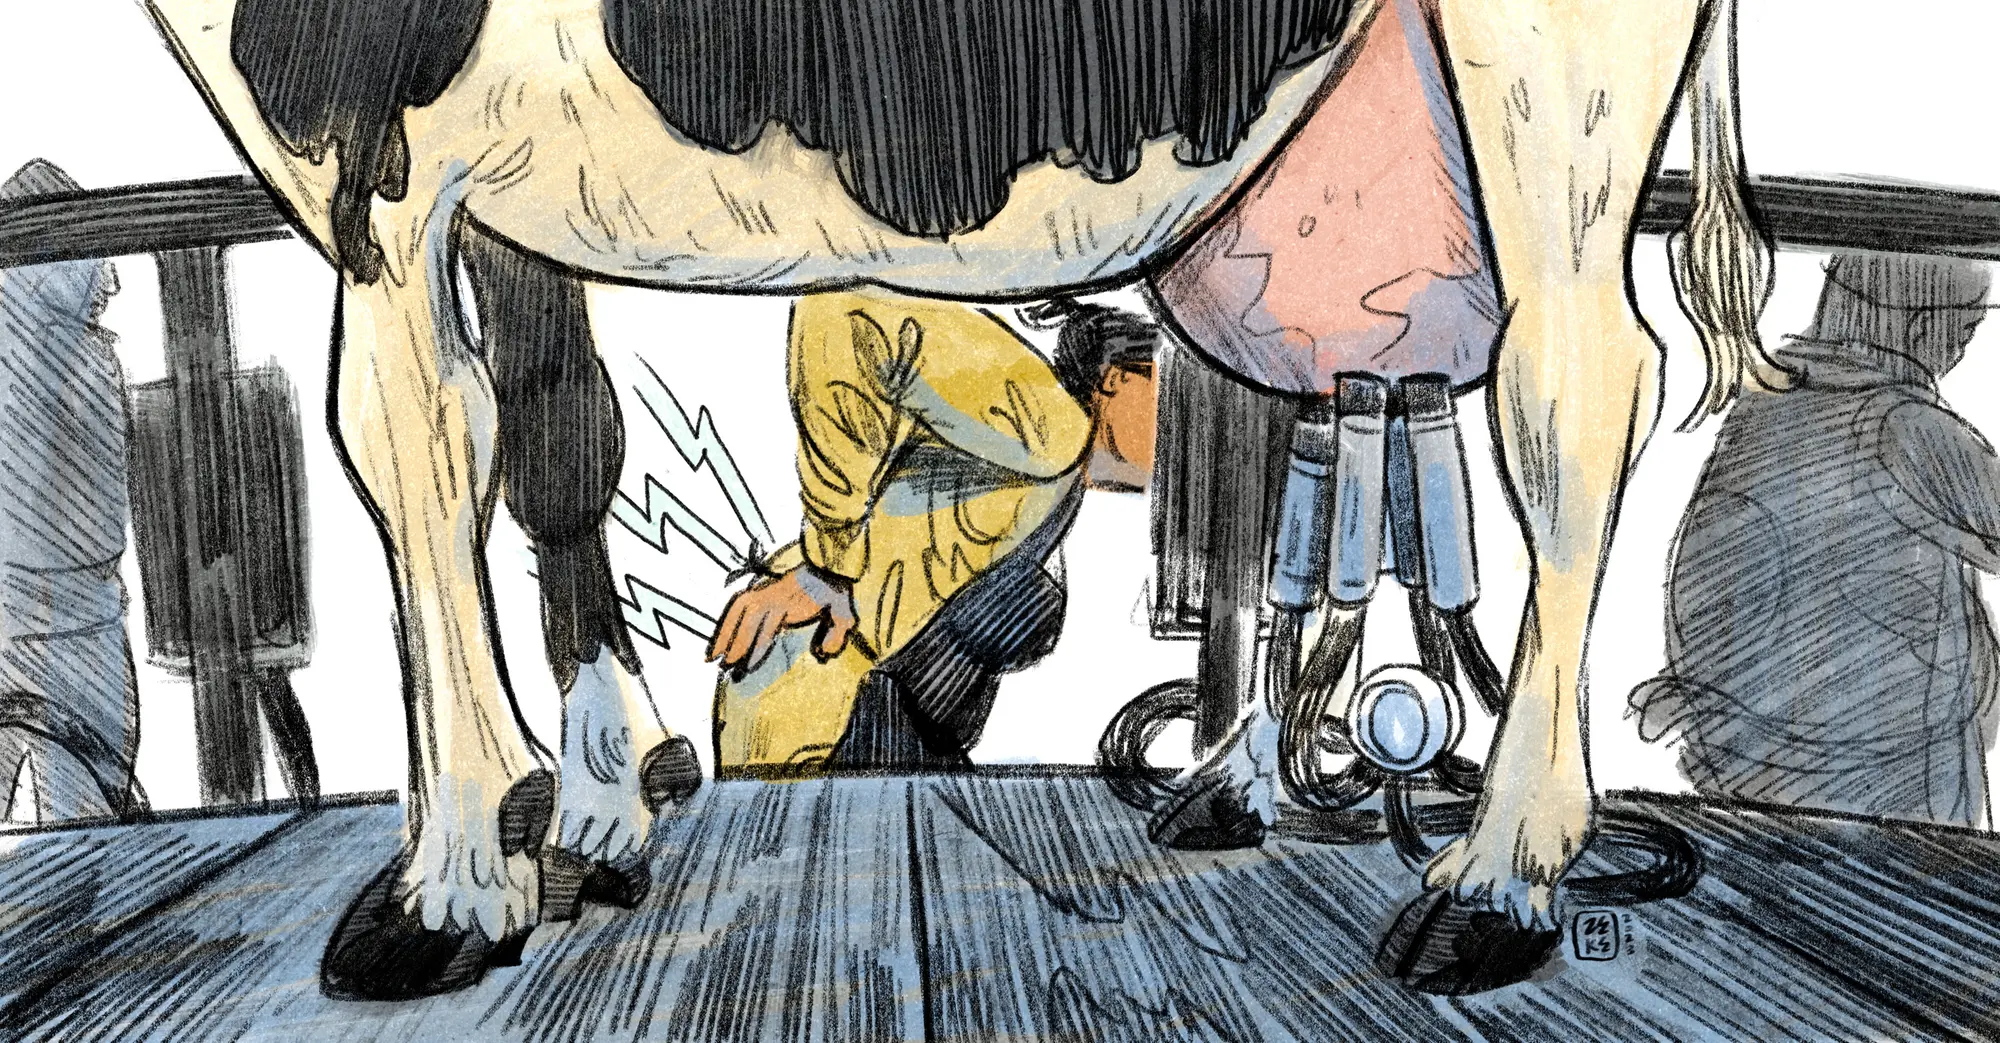 When Immigrant Dairy Farm Workers Get Hurt, Most Can’t Rely on Workers’ Compensation (propublica.org)